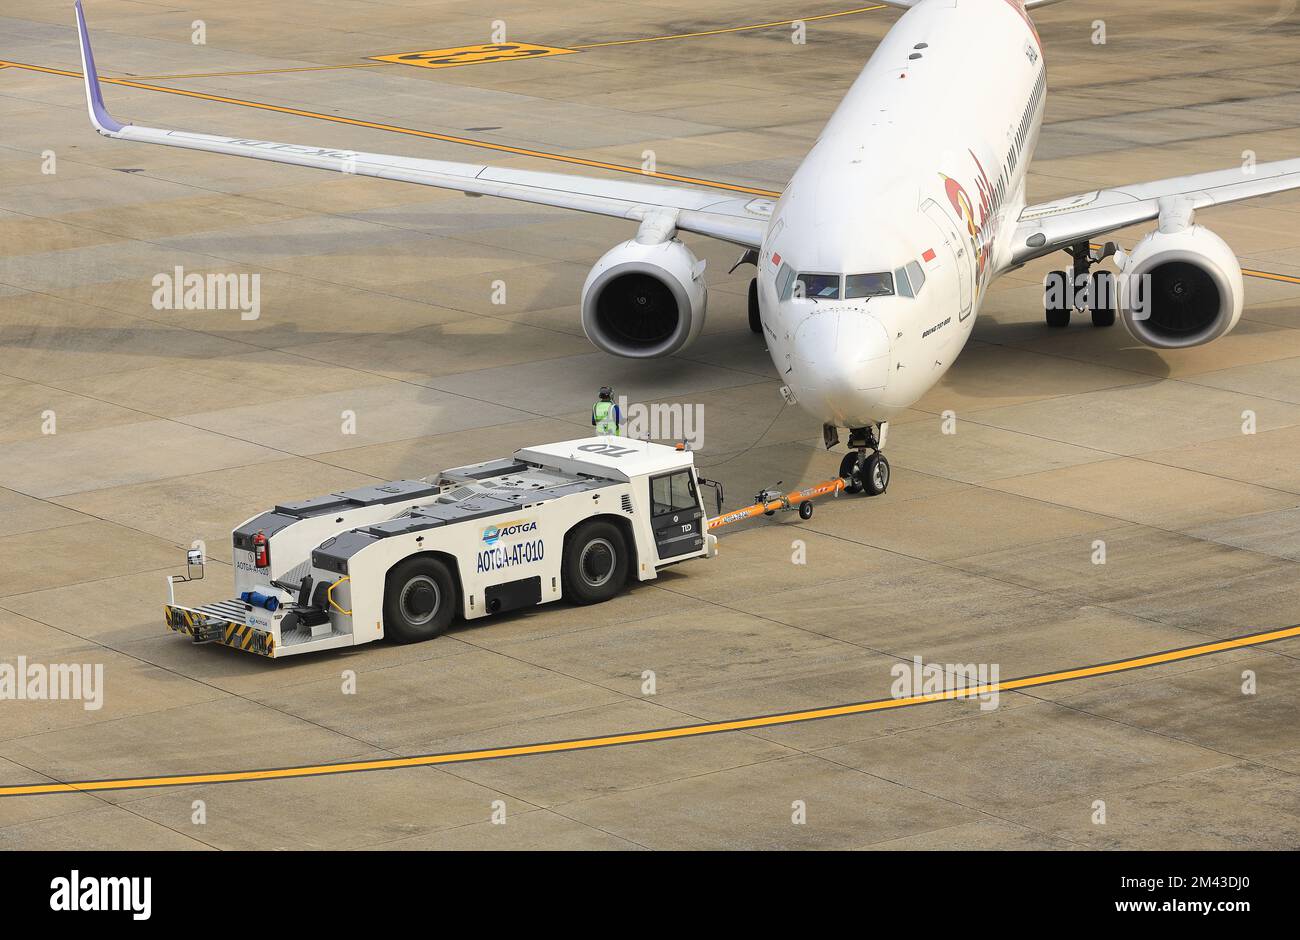 Airplane Tugs, Machine for push back the aircraft to taxiway, one in ground handling services Stock Photo